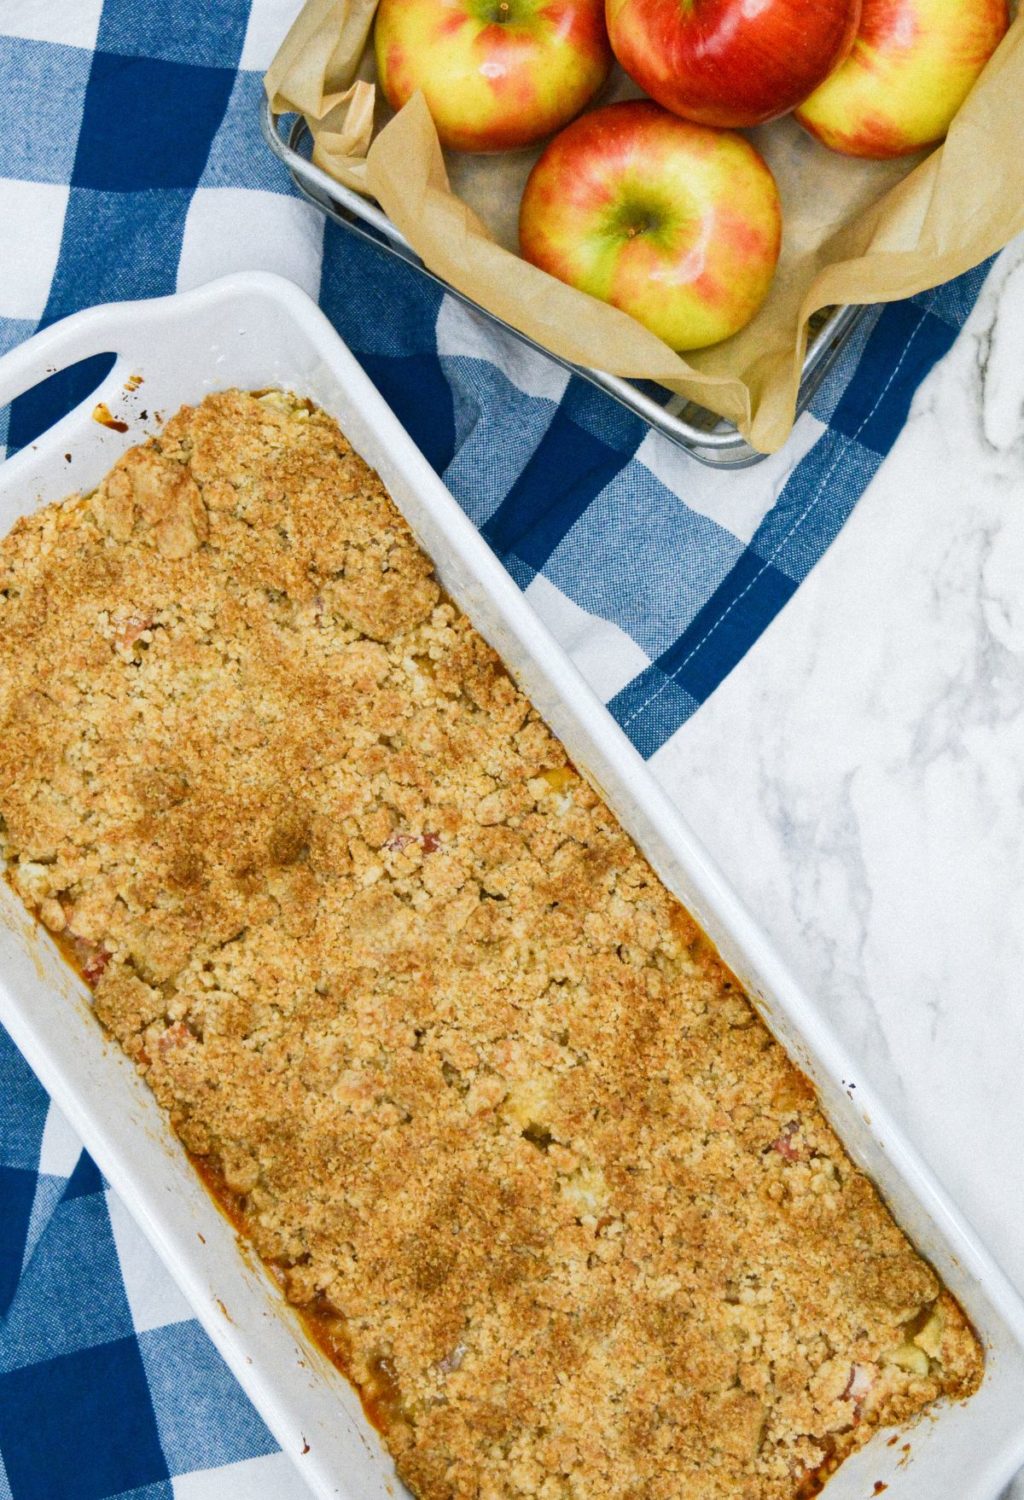 An apple crumble in a baking dish with apples next to it.